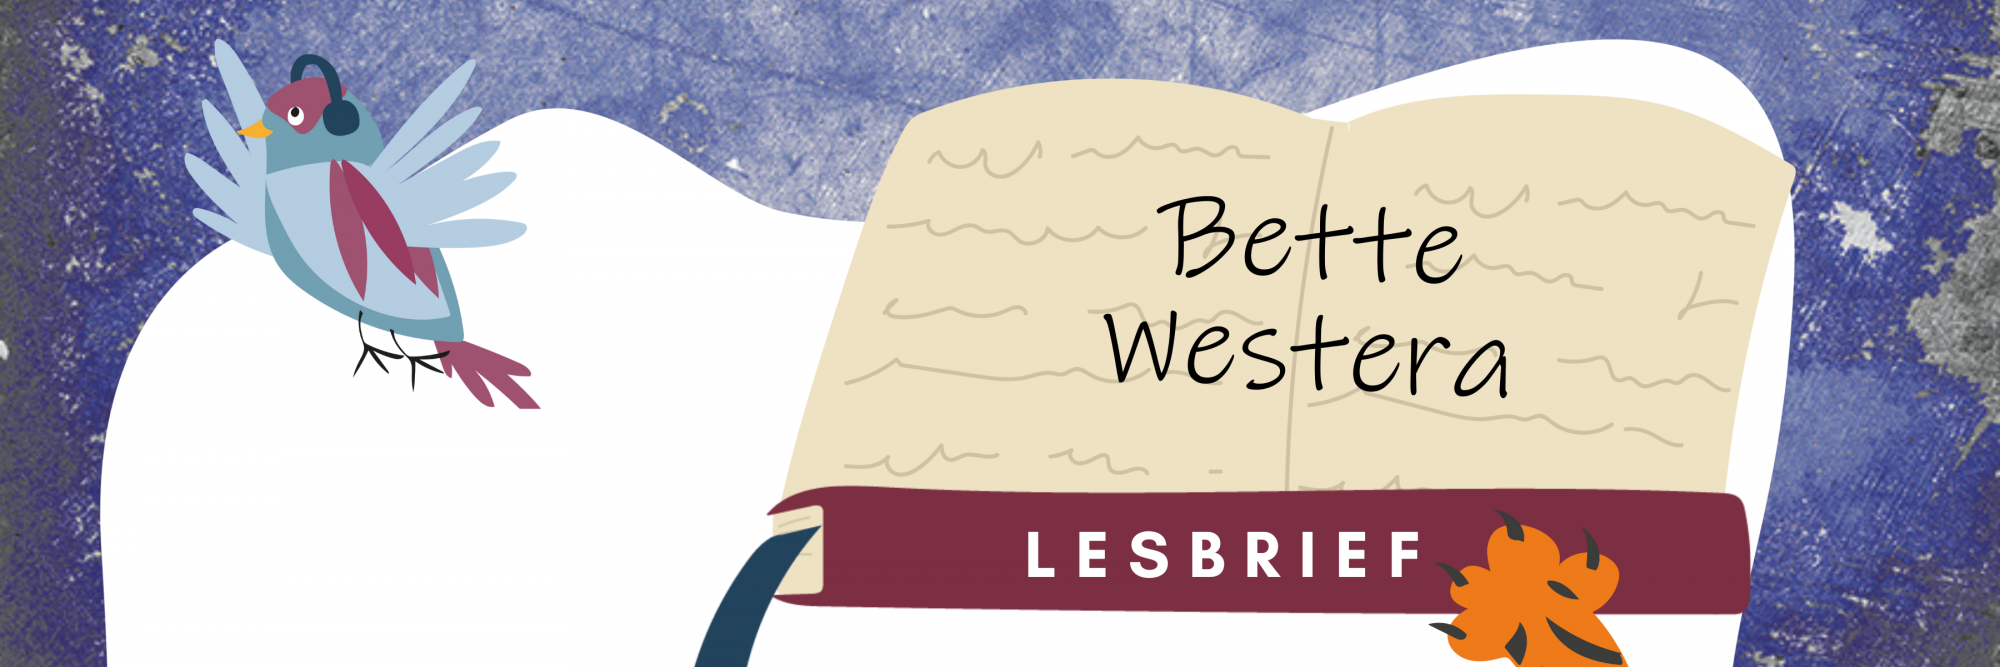 banner lesbrief bette westera .png